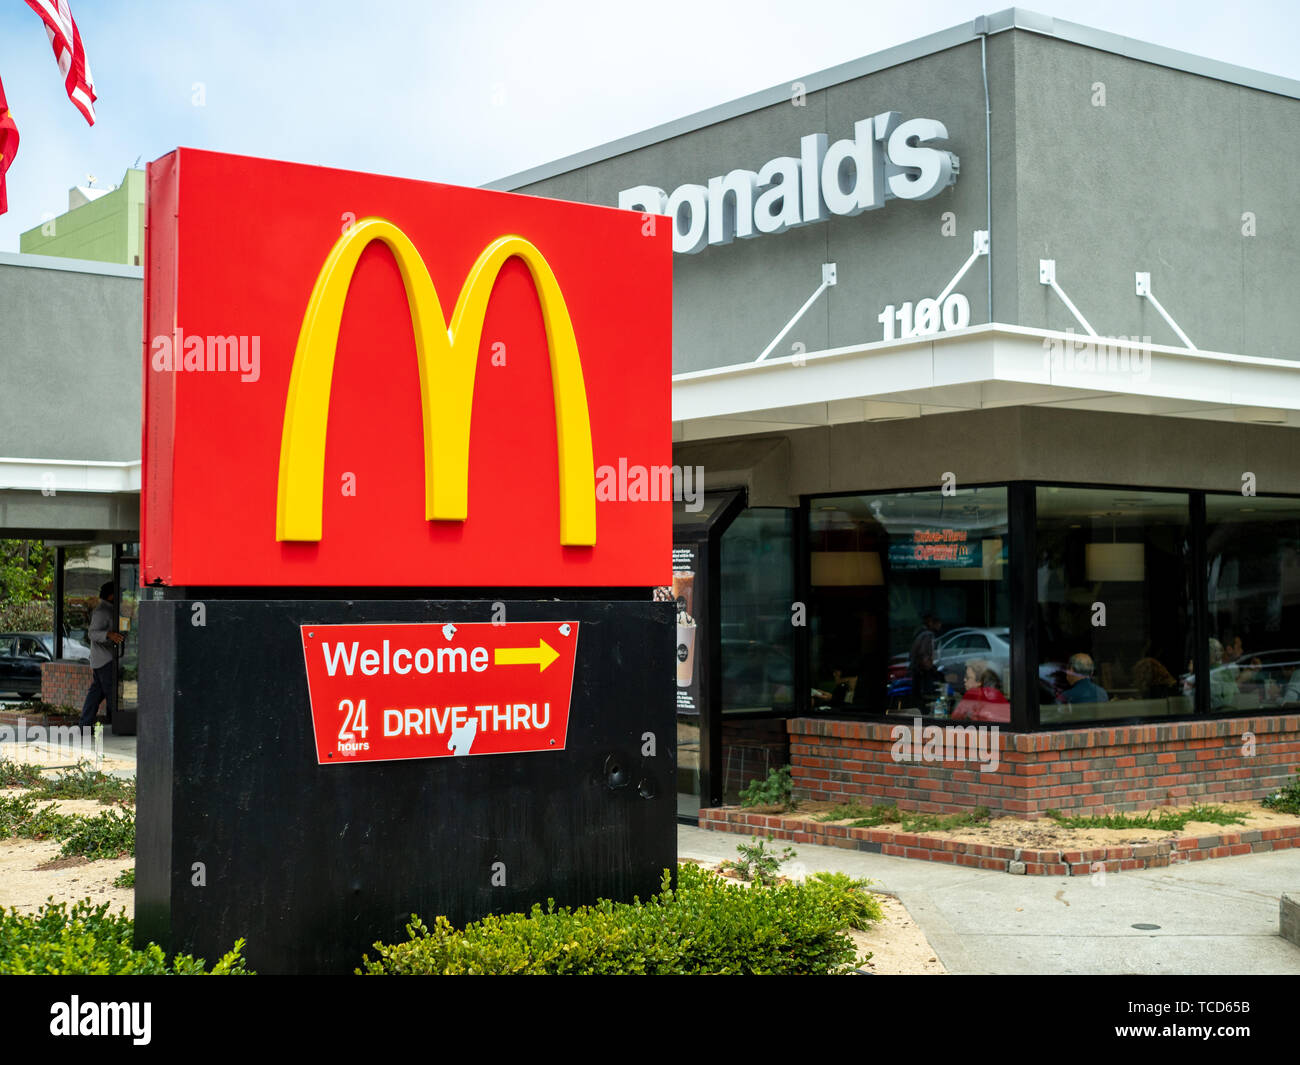 McDonalds logo, restaurant location and 24 hour drive through sign outside of remodeled location Stock Photo